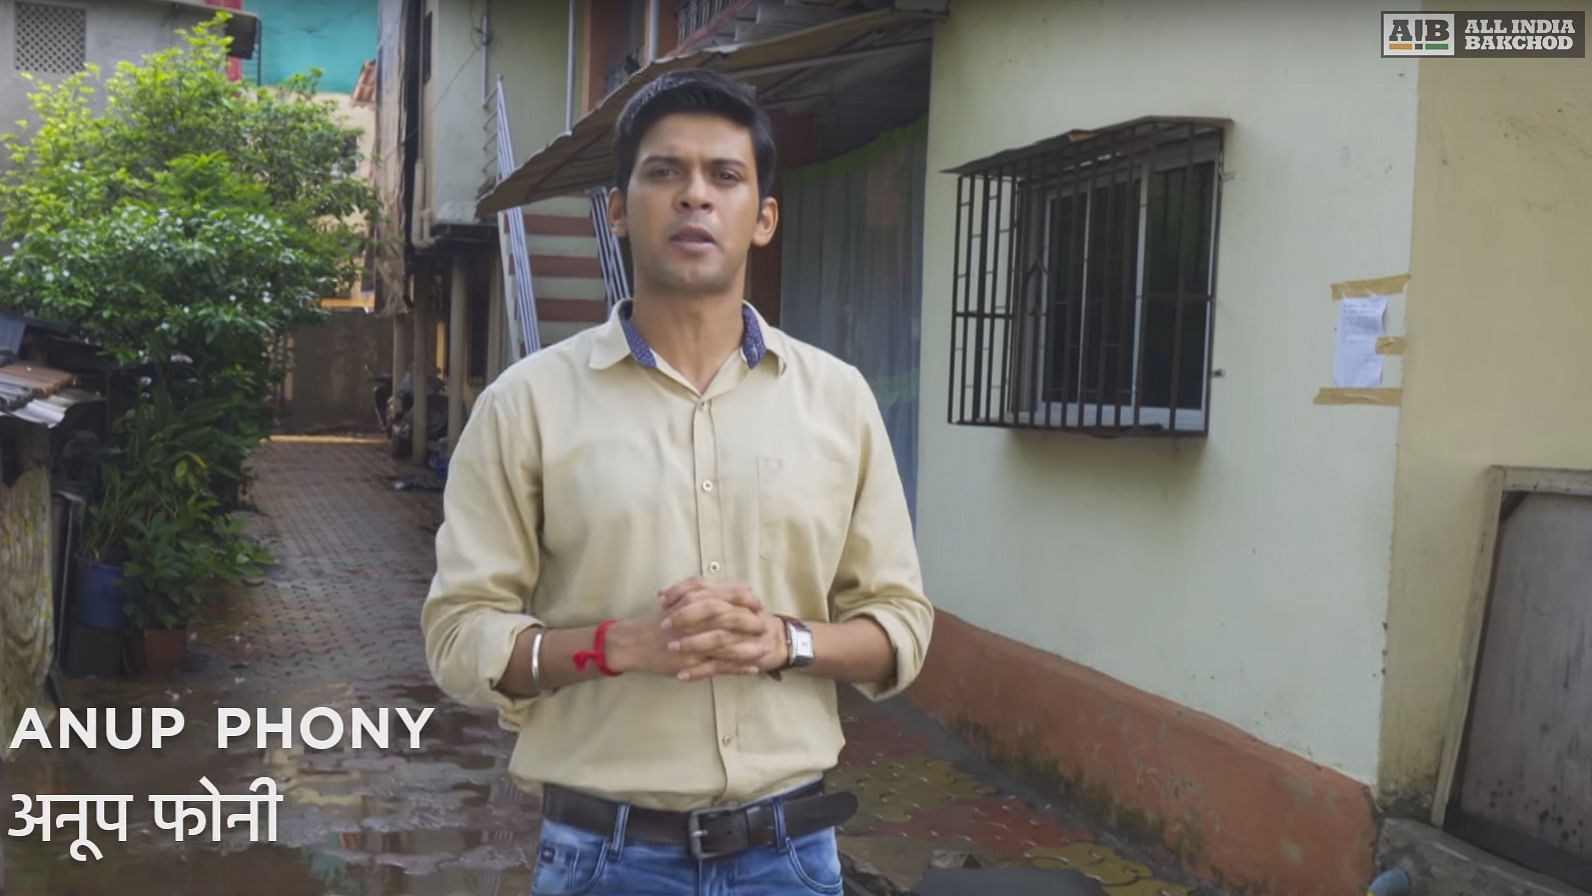 Have you watch  this <i>chindi </i>version of Crime Patrol yet? (Photo Courtesy: Youtube/<a href="https://www.youtube.com/watch?v=-Xg_KnhoWy8">AIB</a>)